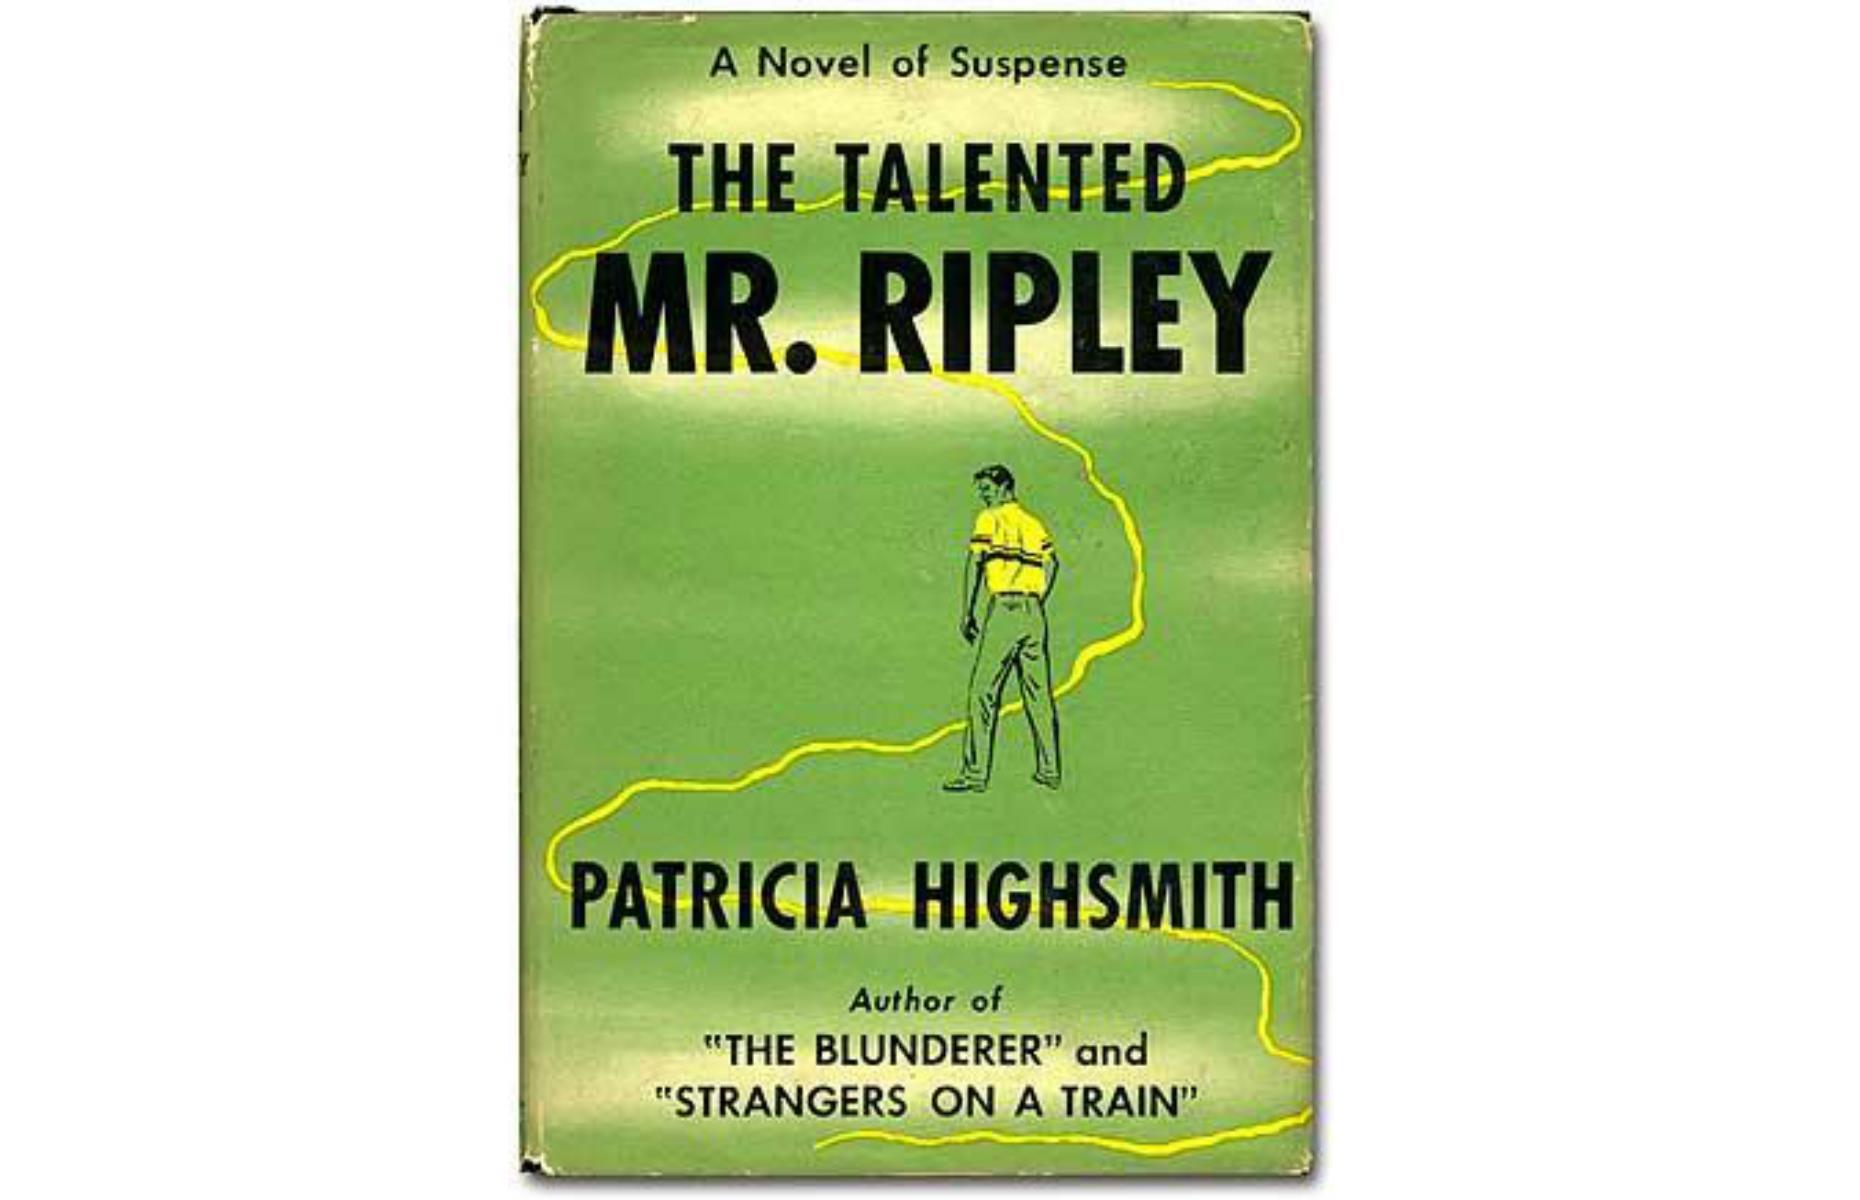 The Talented Mr Ripley: up to $9,500 (£7,680)